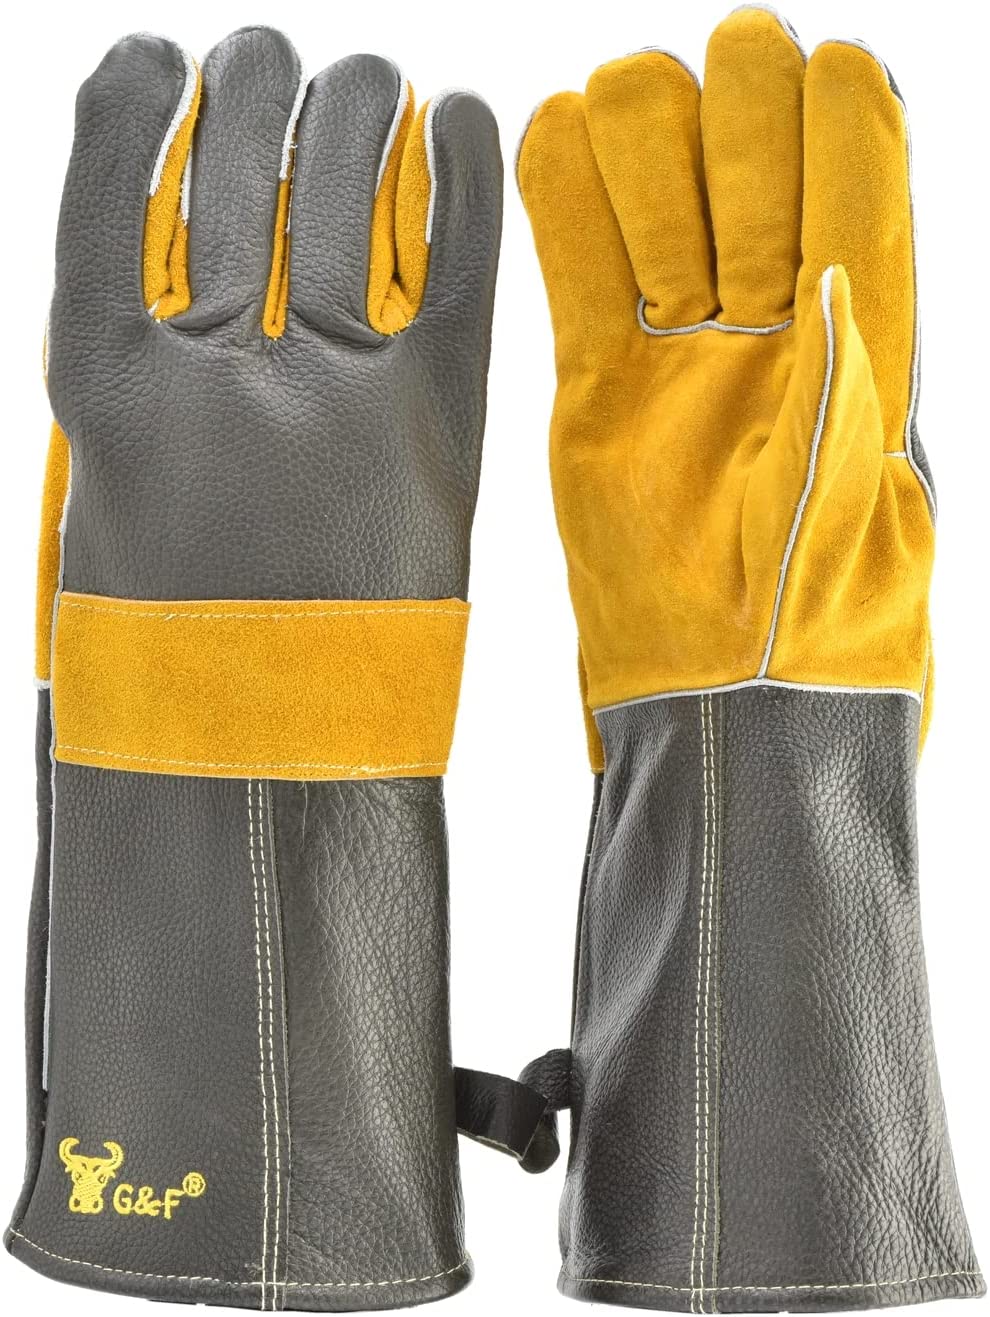 G & F Products Cotton Lined Flexible Fireplace Gloves